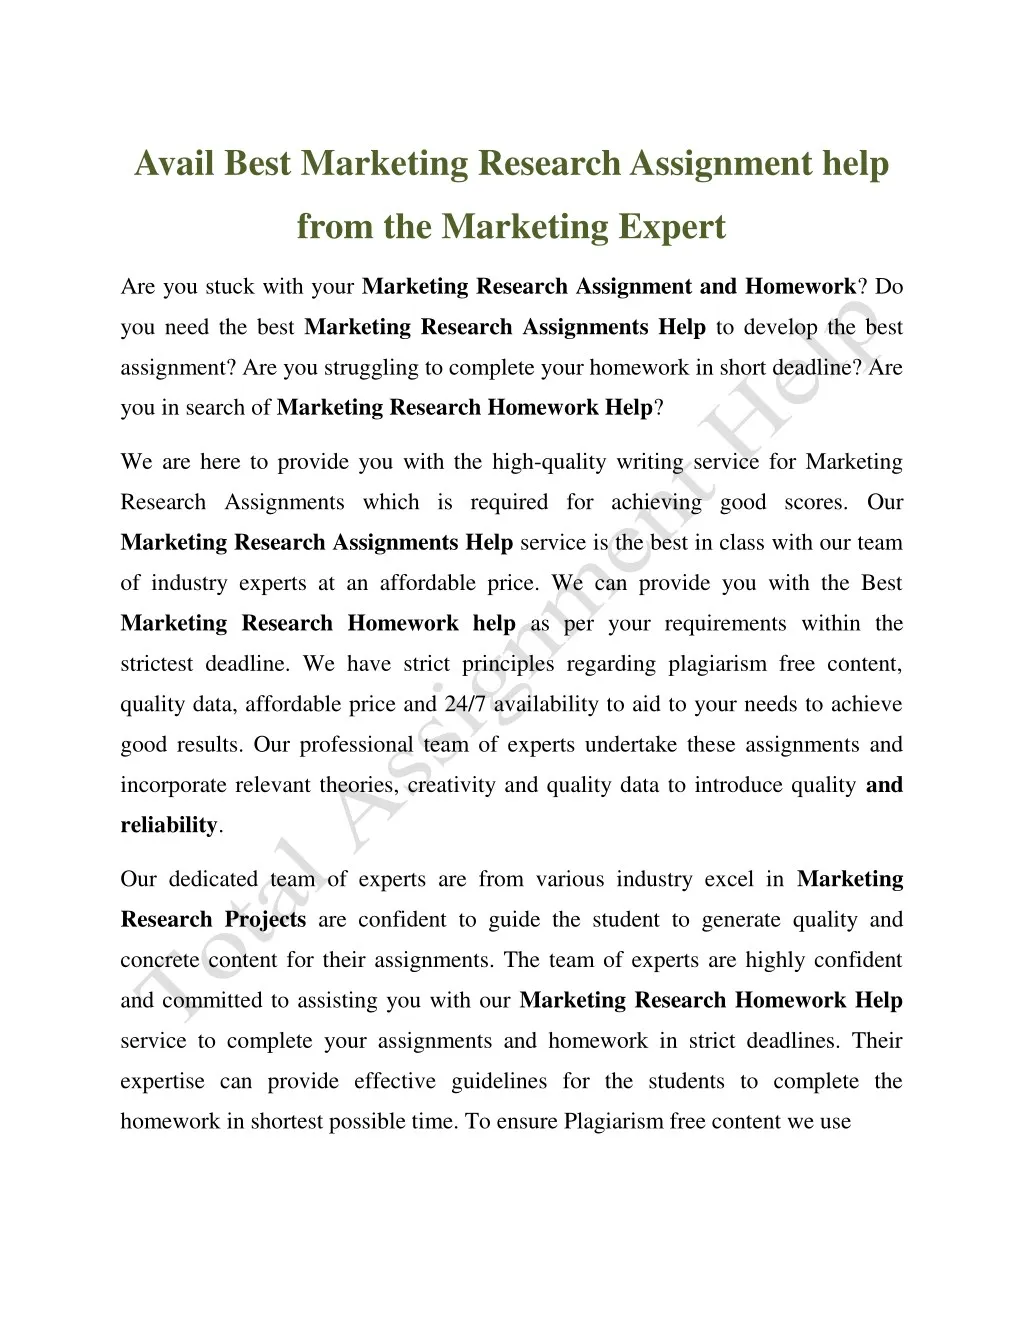 avail best marketing research assignment help